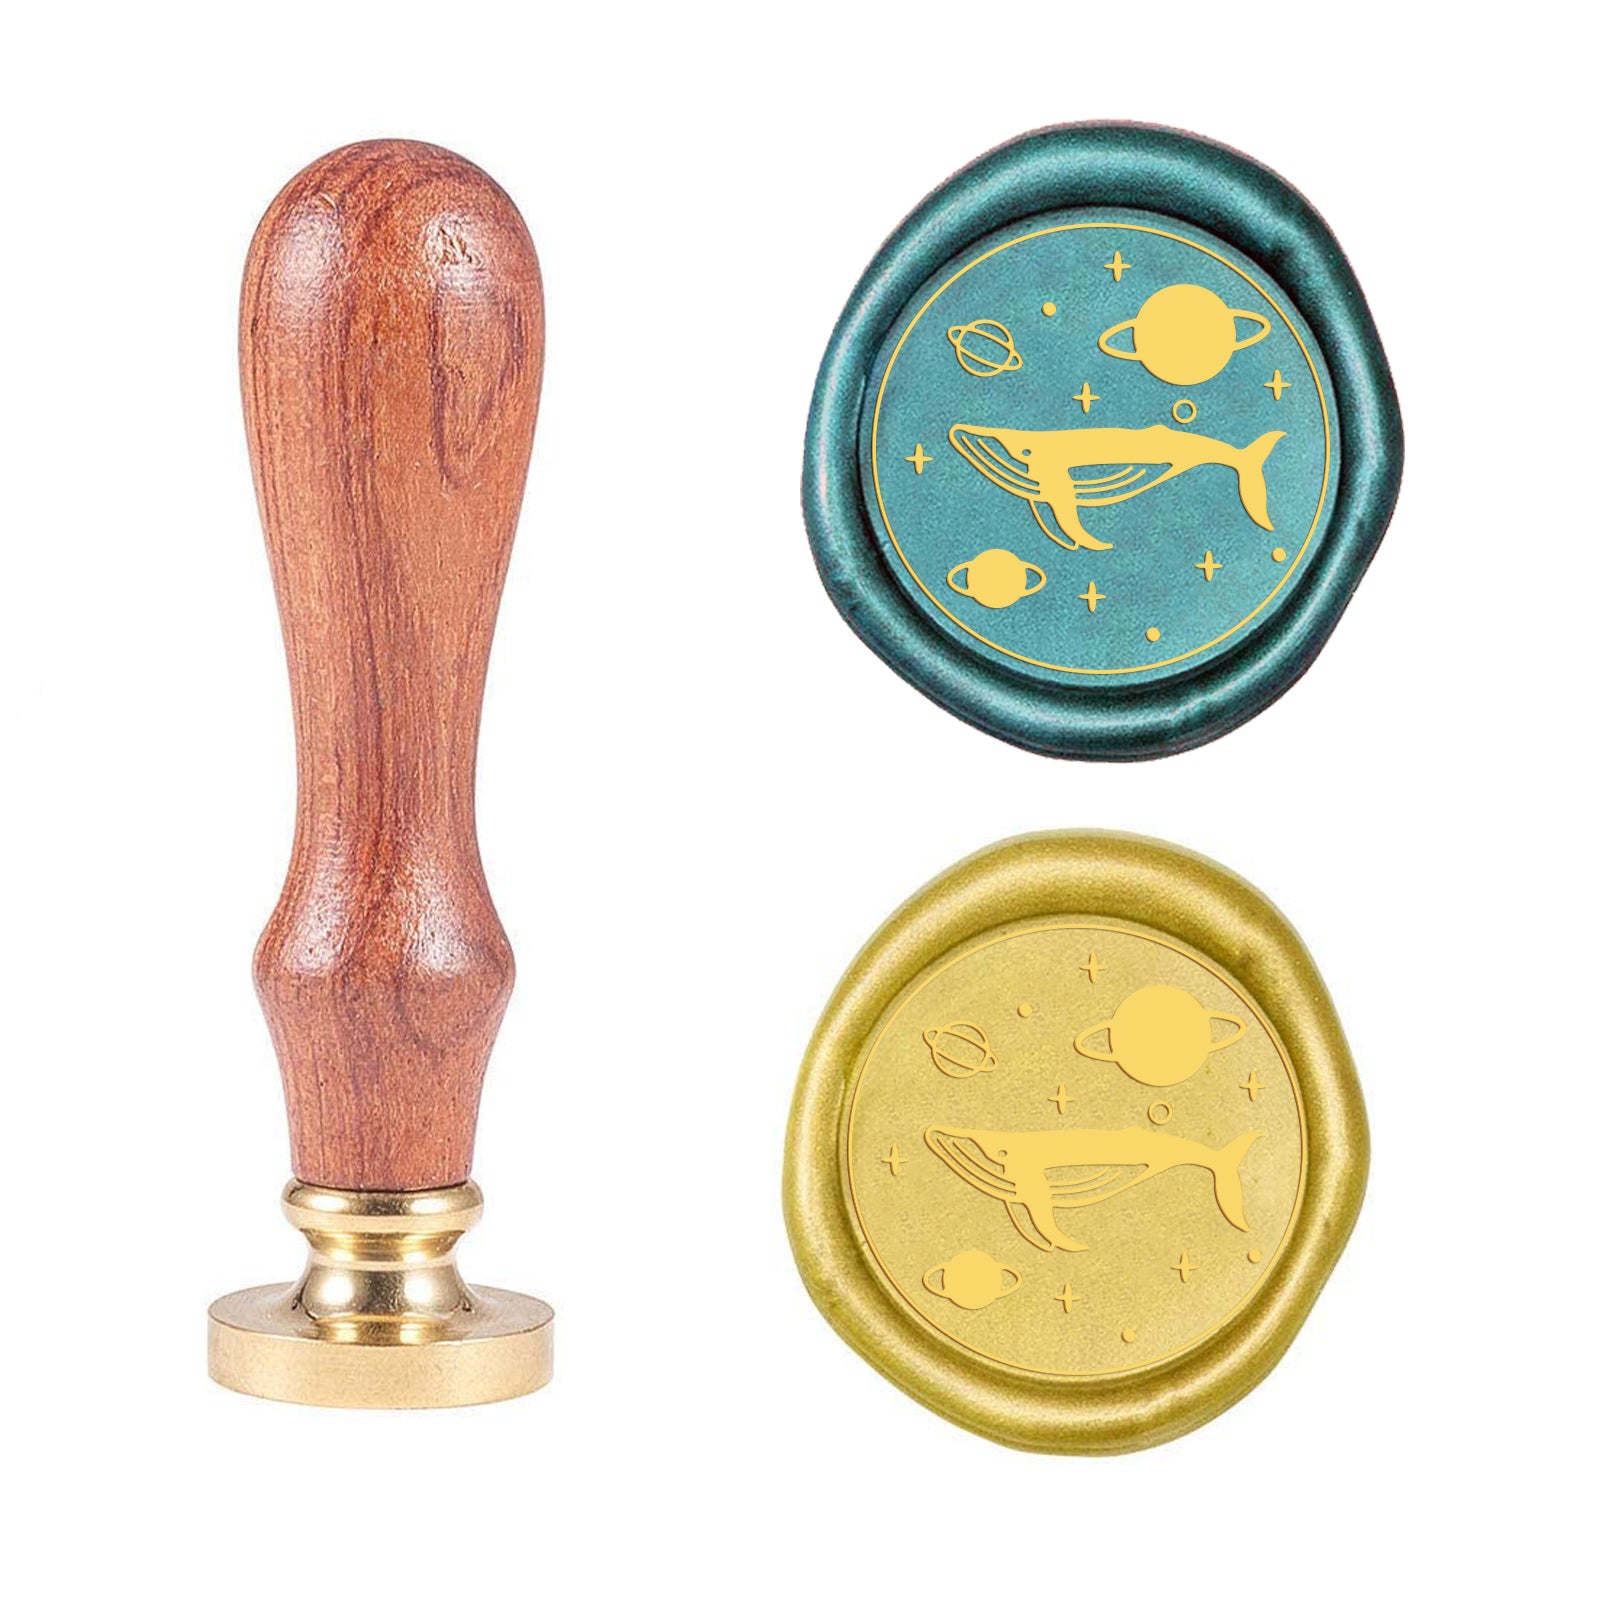 Planet Whale Wood Handle Wax Seal Stamp